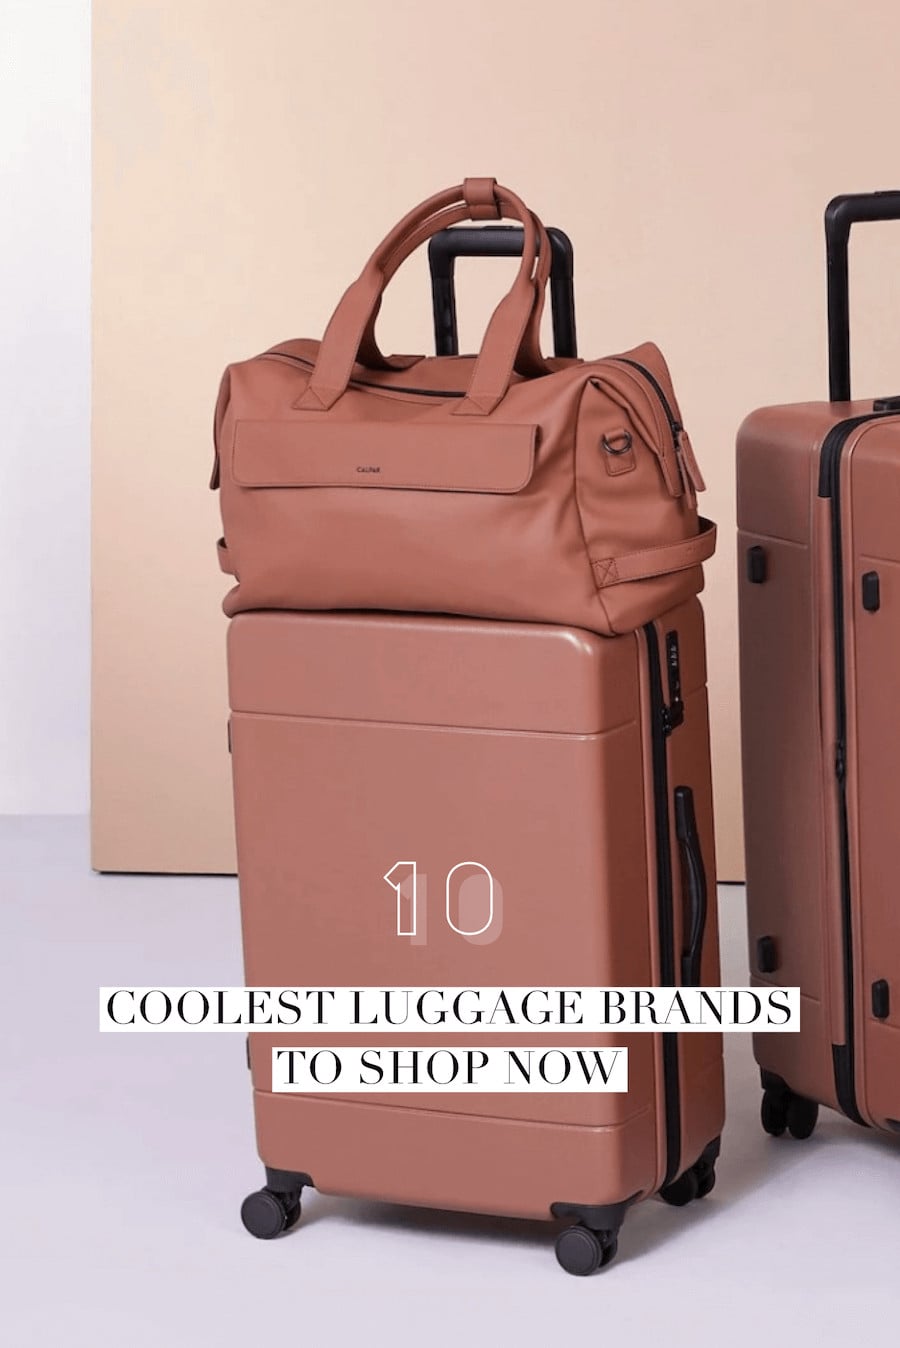 The Most Stylish Luggage Brands to Take on Your Next Trip